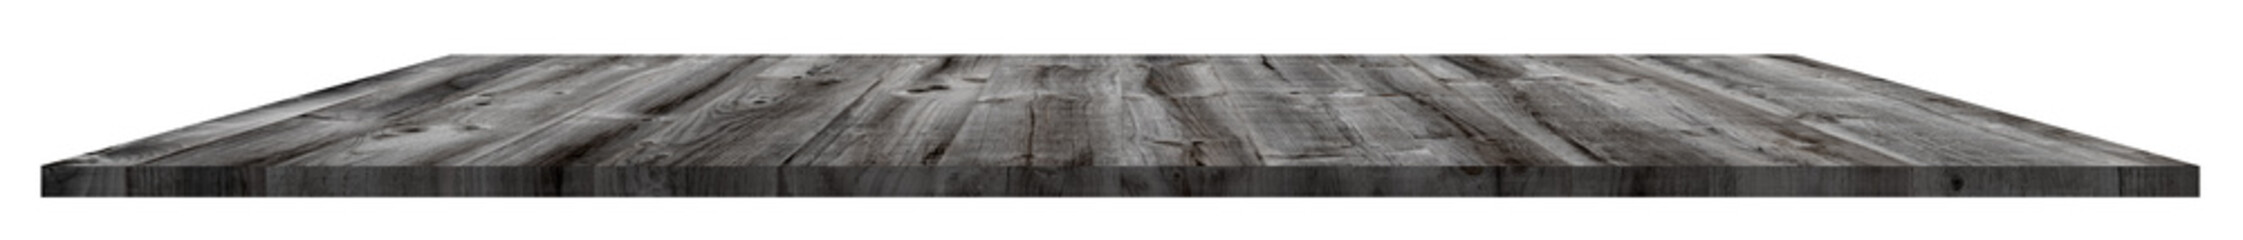 Wood texture countertop, Isolated Perspective Grey Wooden shelves, Elements Template mock up for wood shelf display products